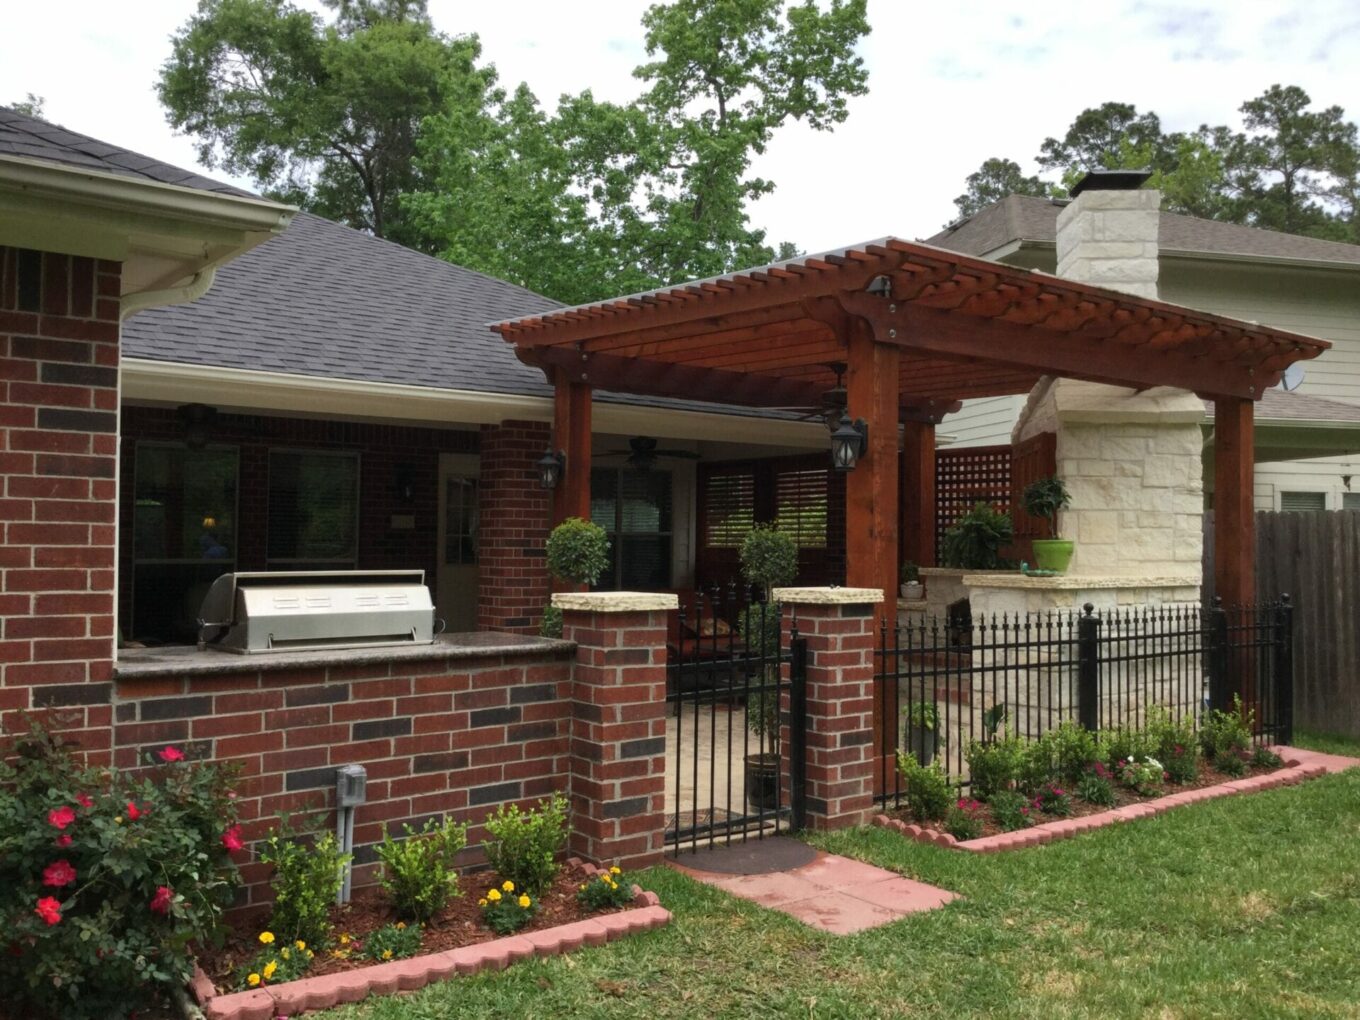 A brick house with a pergola and grill